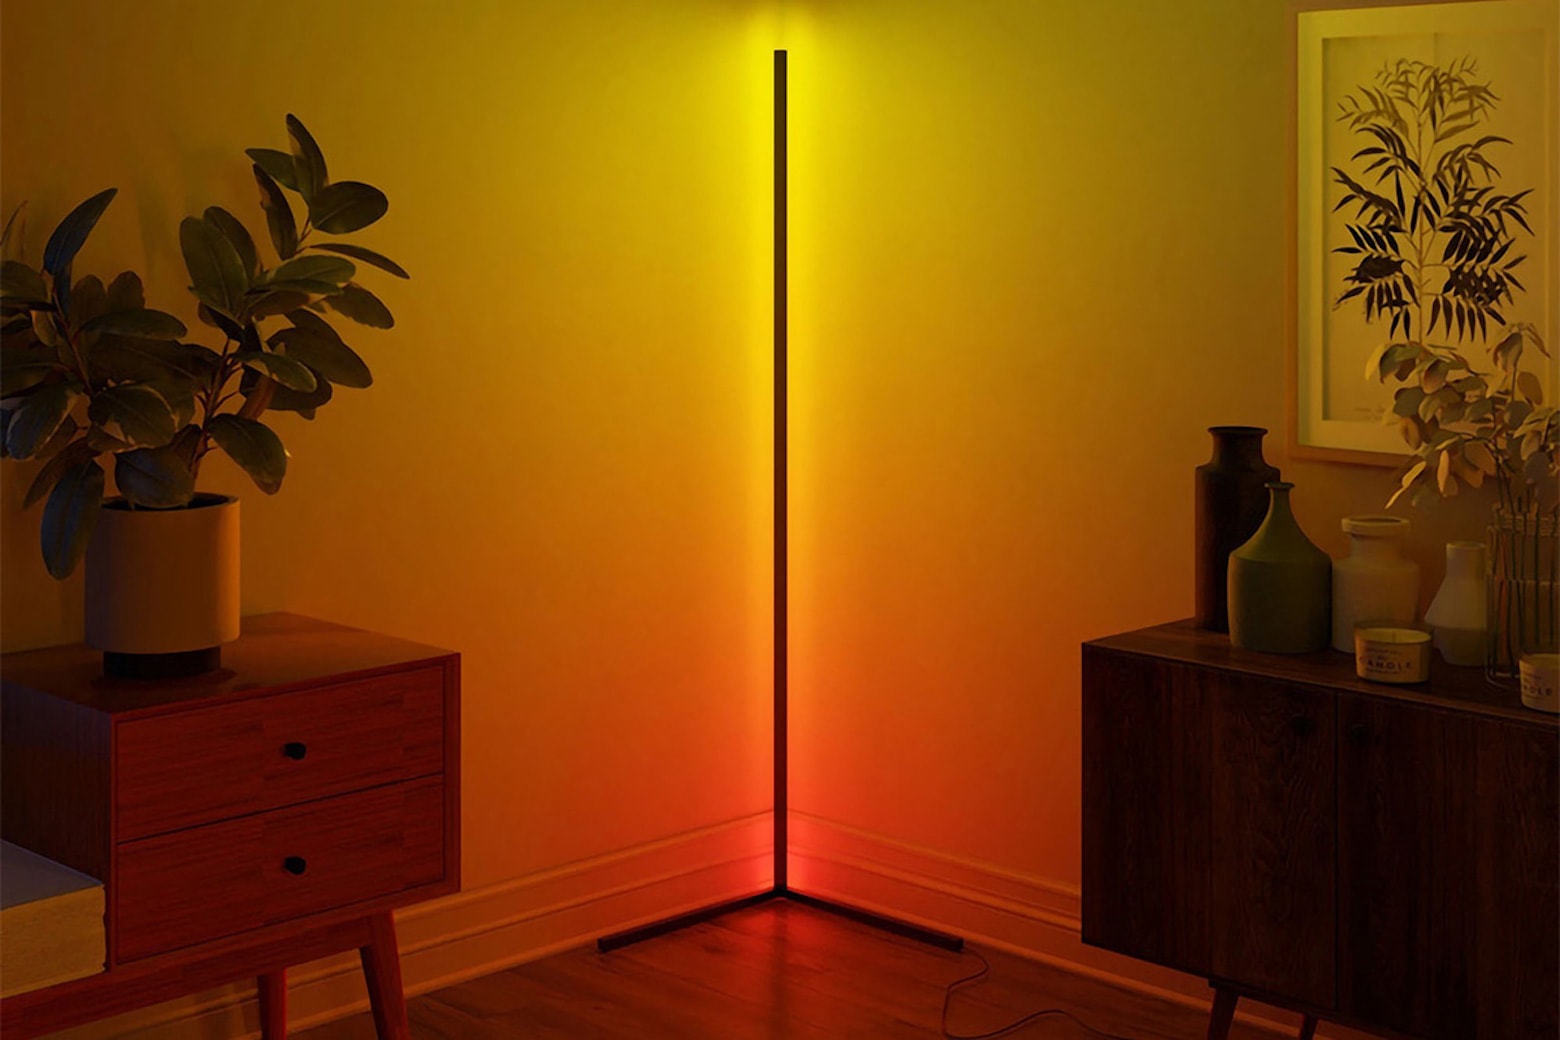 Gentle up your room like a lightsaber with these minimalist LED flooring lamps